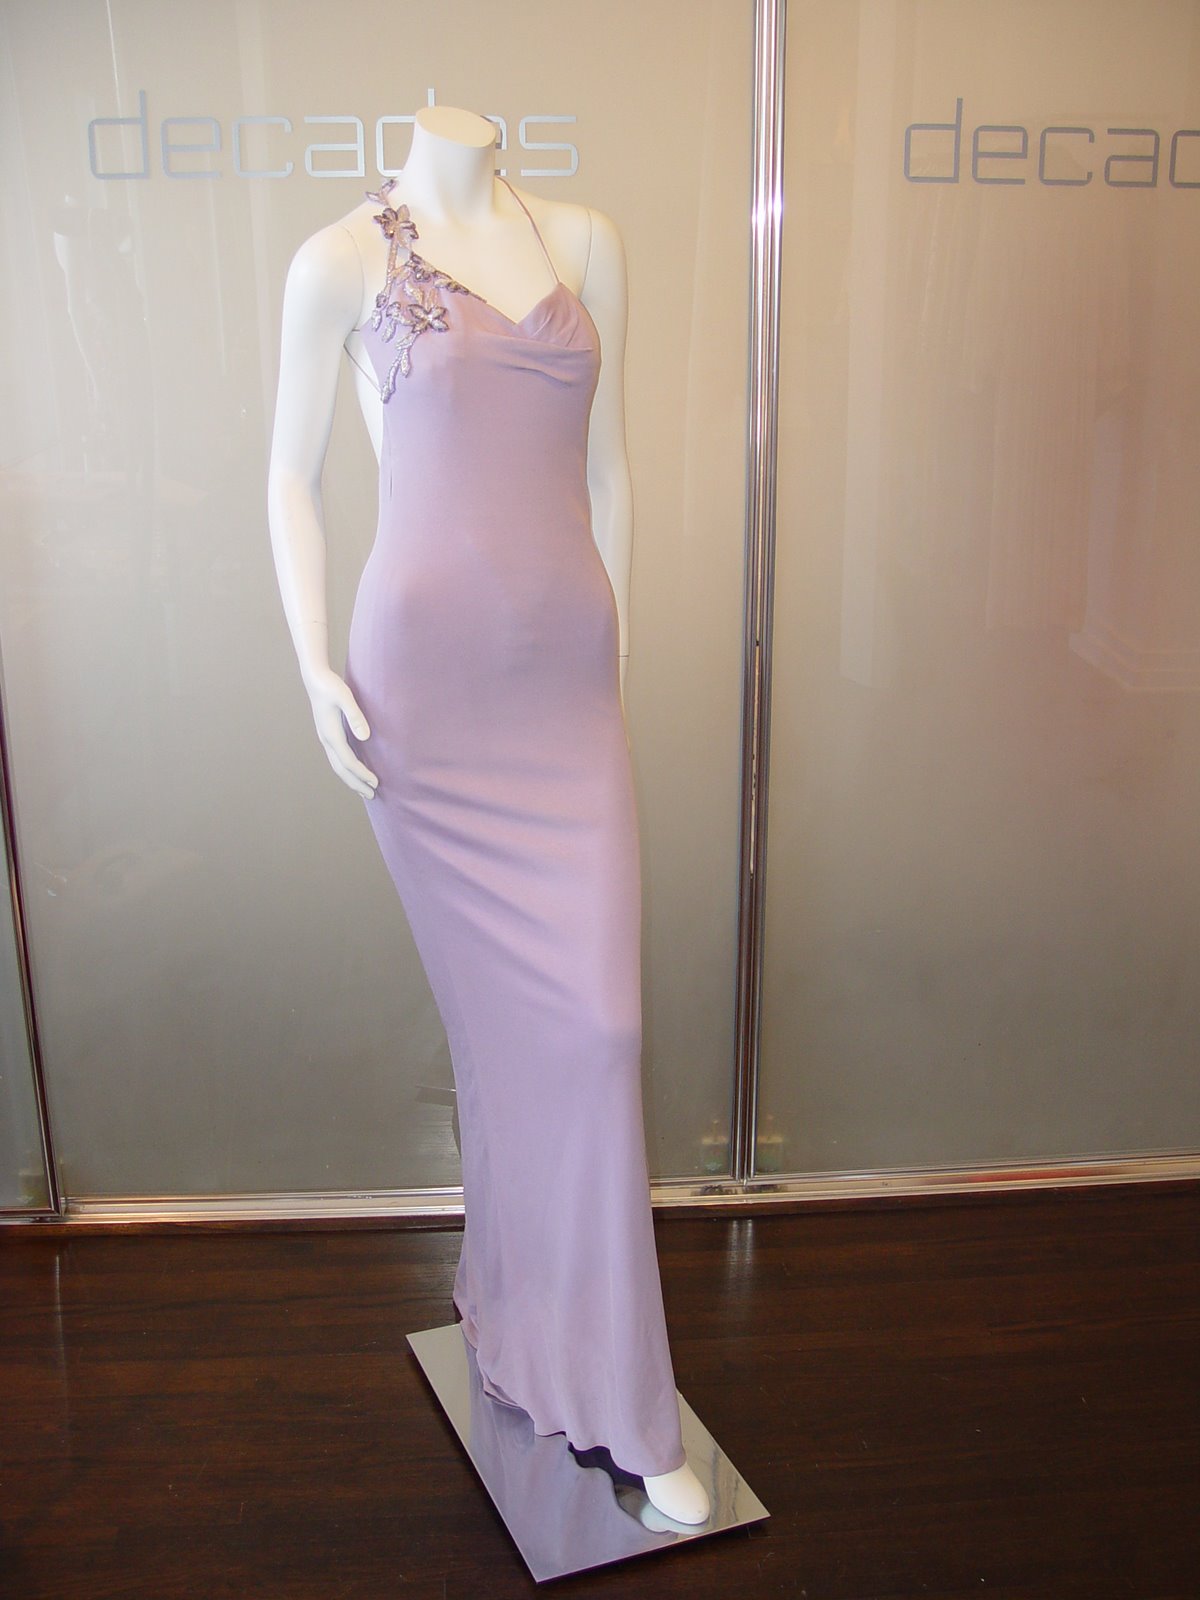 [GIANNI+VERSACE+LILAC+90S+EVENING+GOWN+WITH+CRISS+CROSS+EMROIDERED+STRAP+SIZE+4.JPG.JPG]